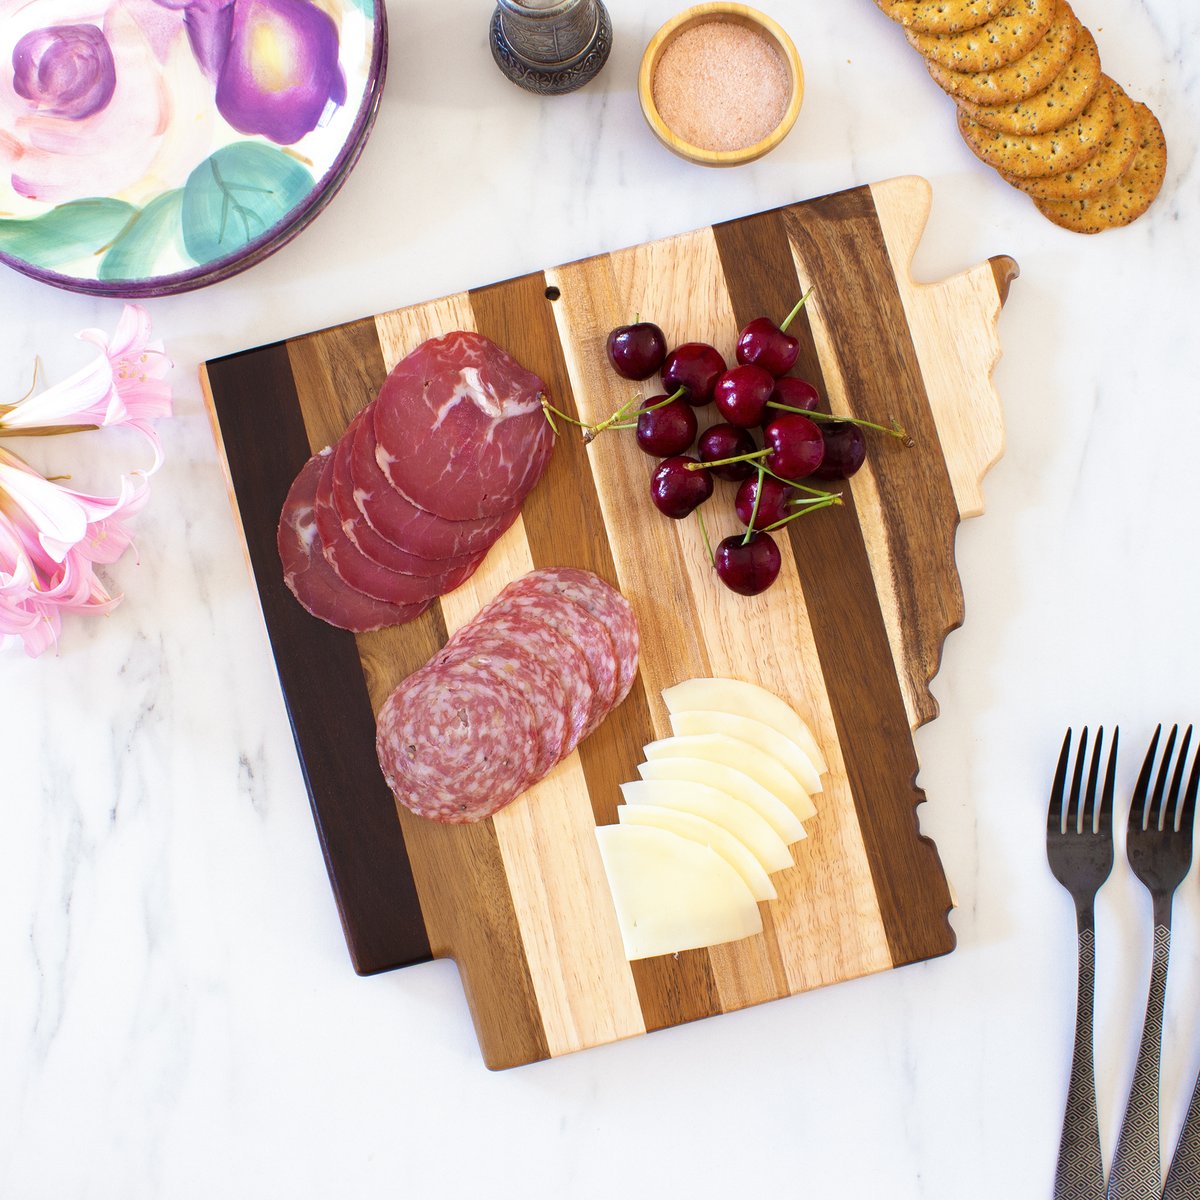 Arkansas shaped board with meat, cheese, and cherries on marble countertop.